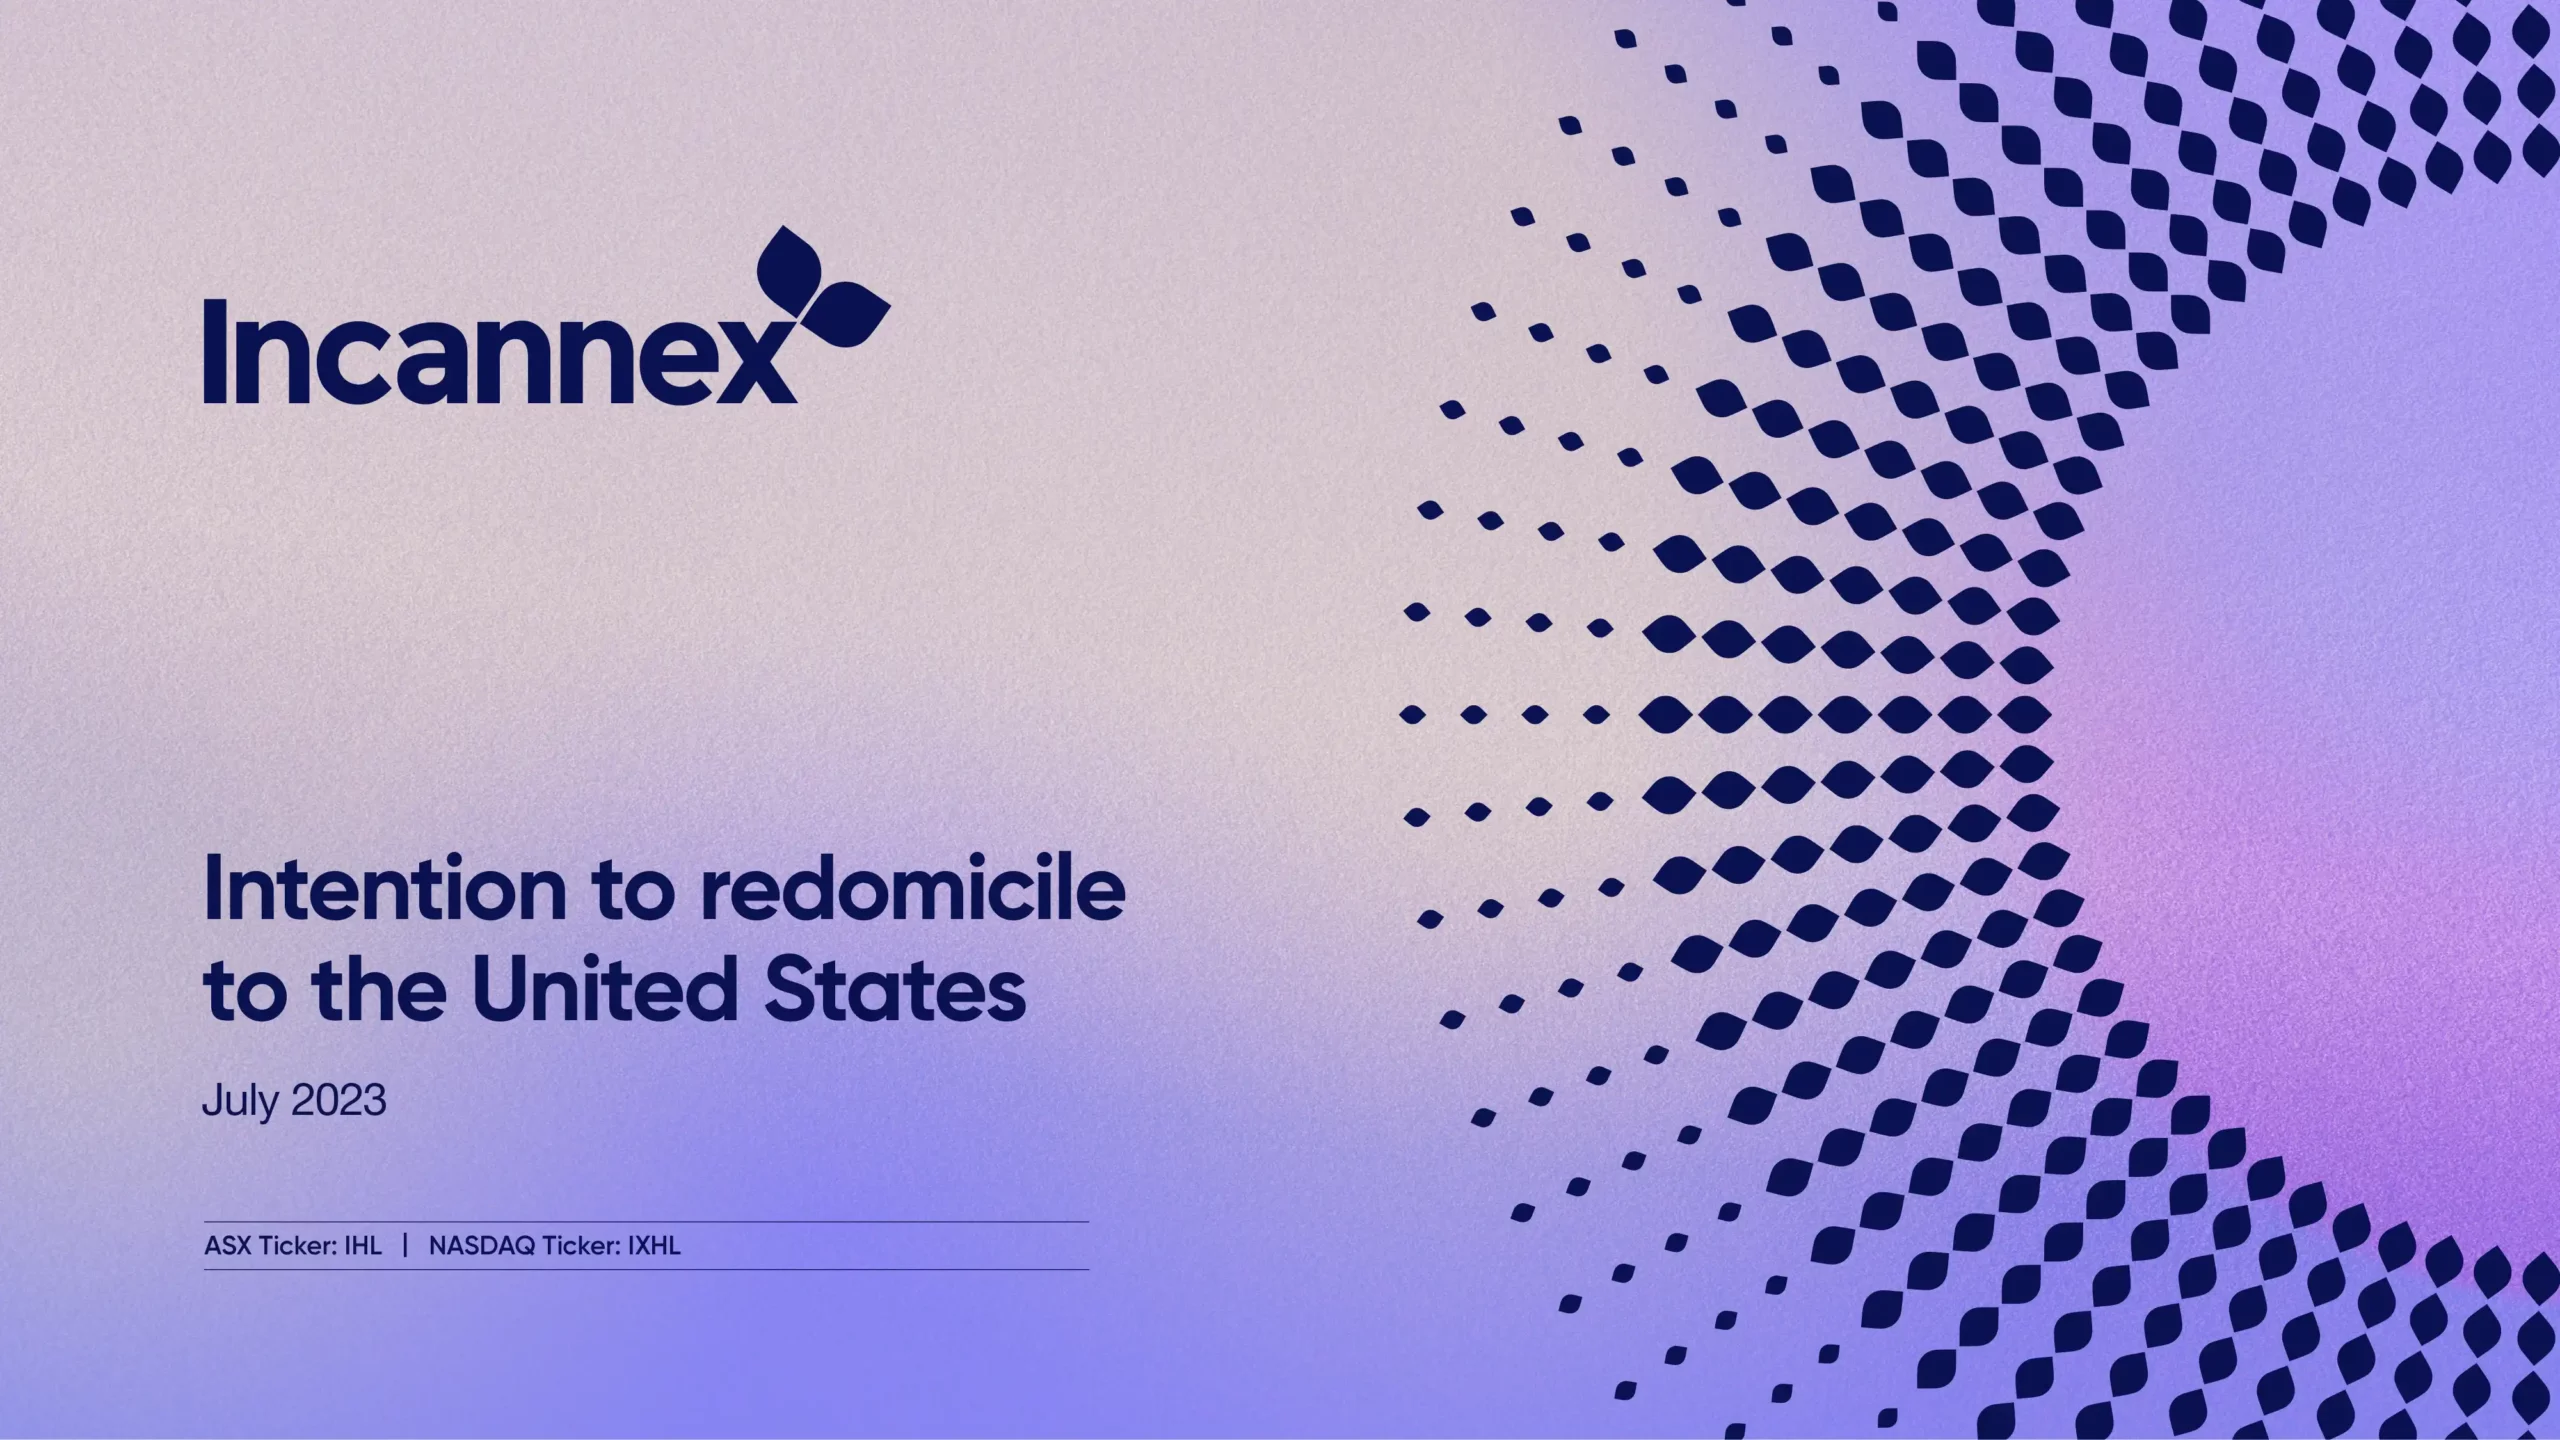 Incannex intention to redomicile to US